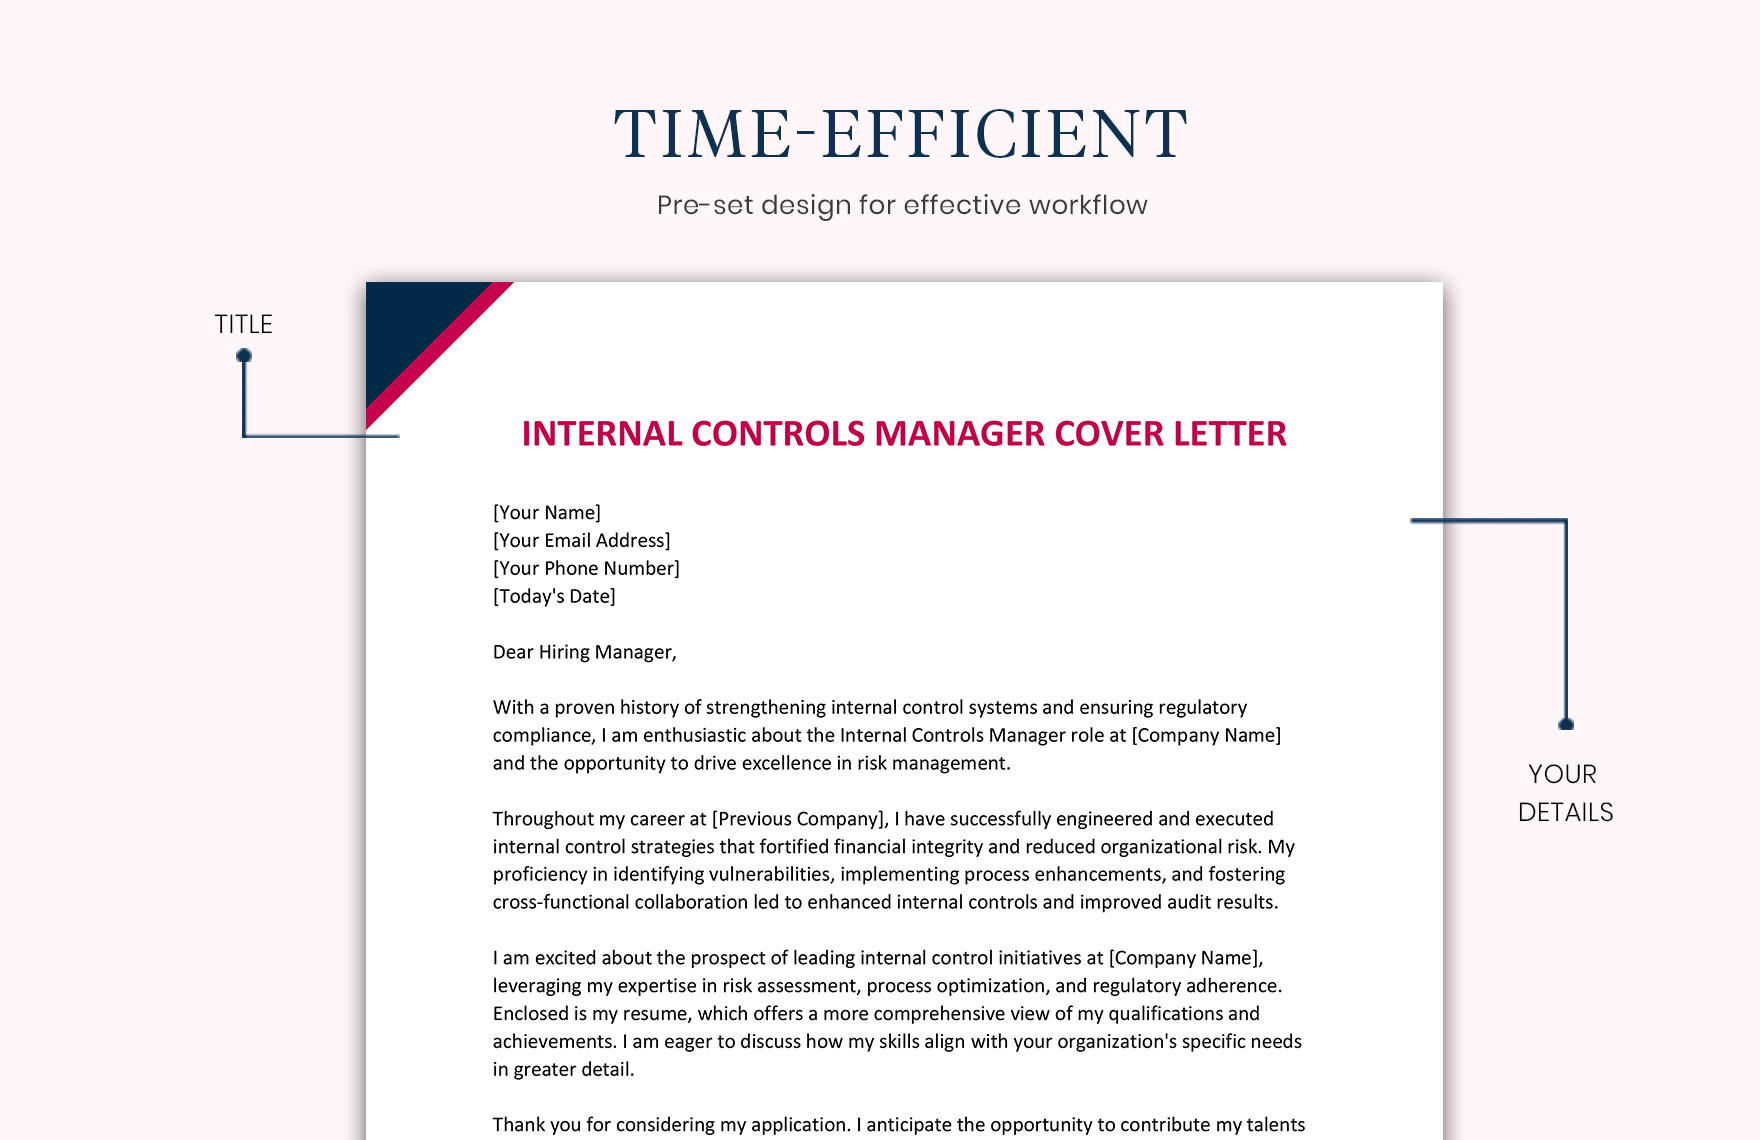 Internal Controls Manager Cover Letter